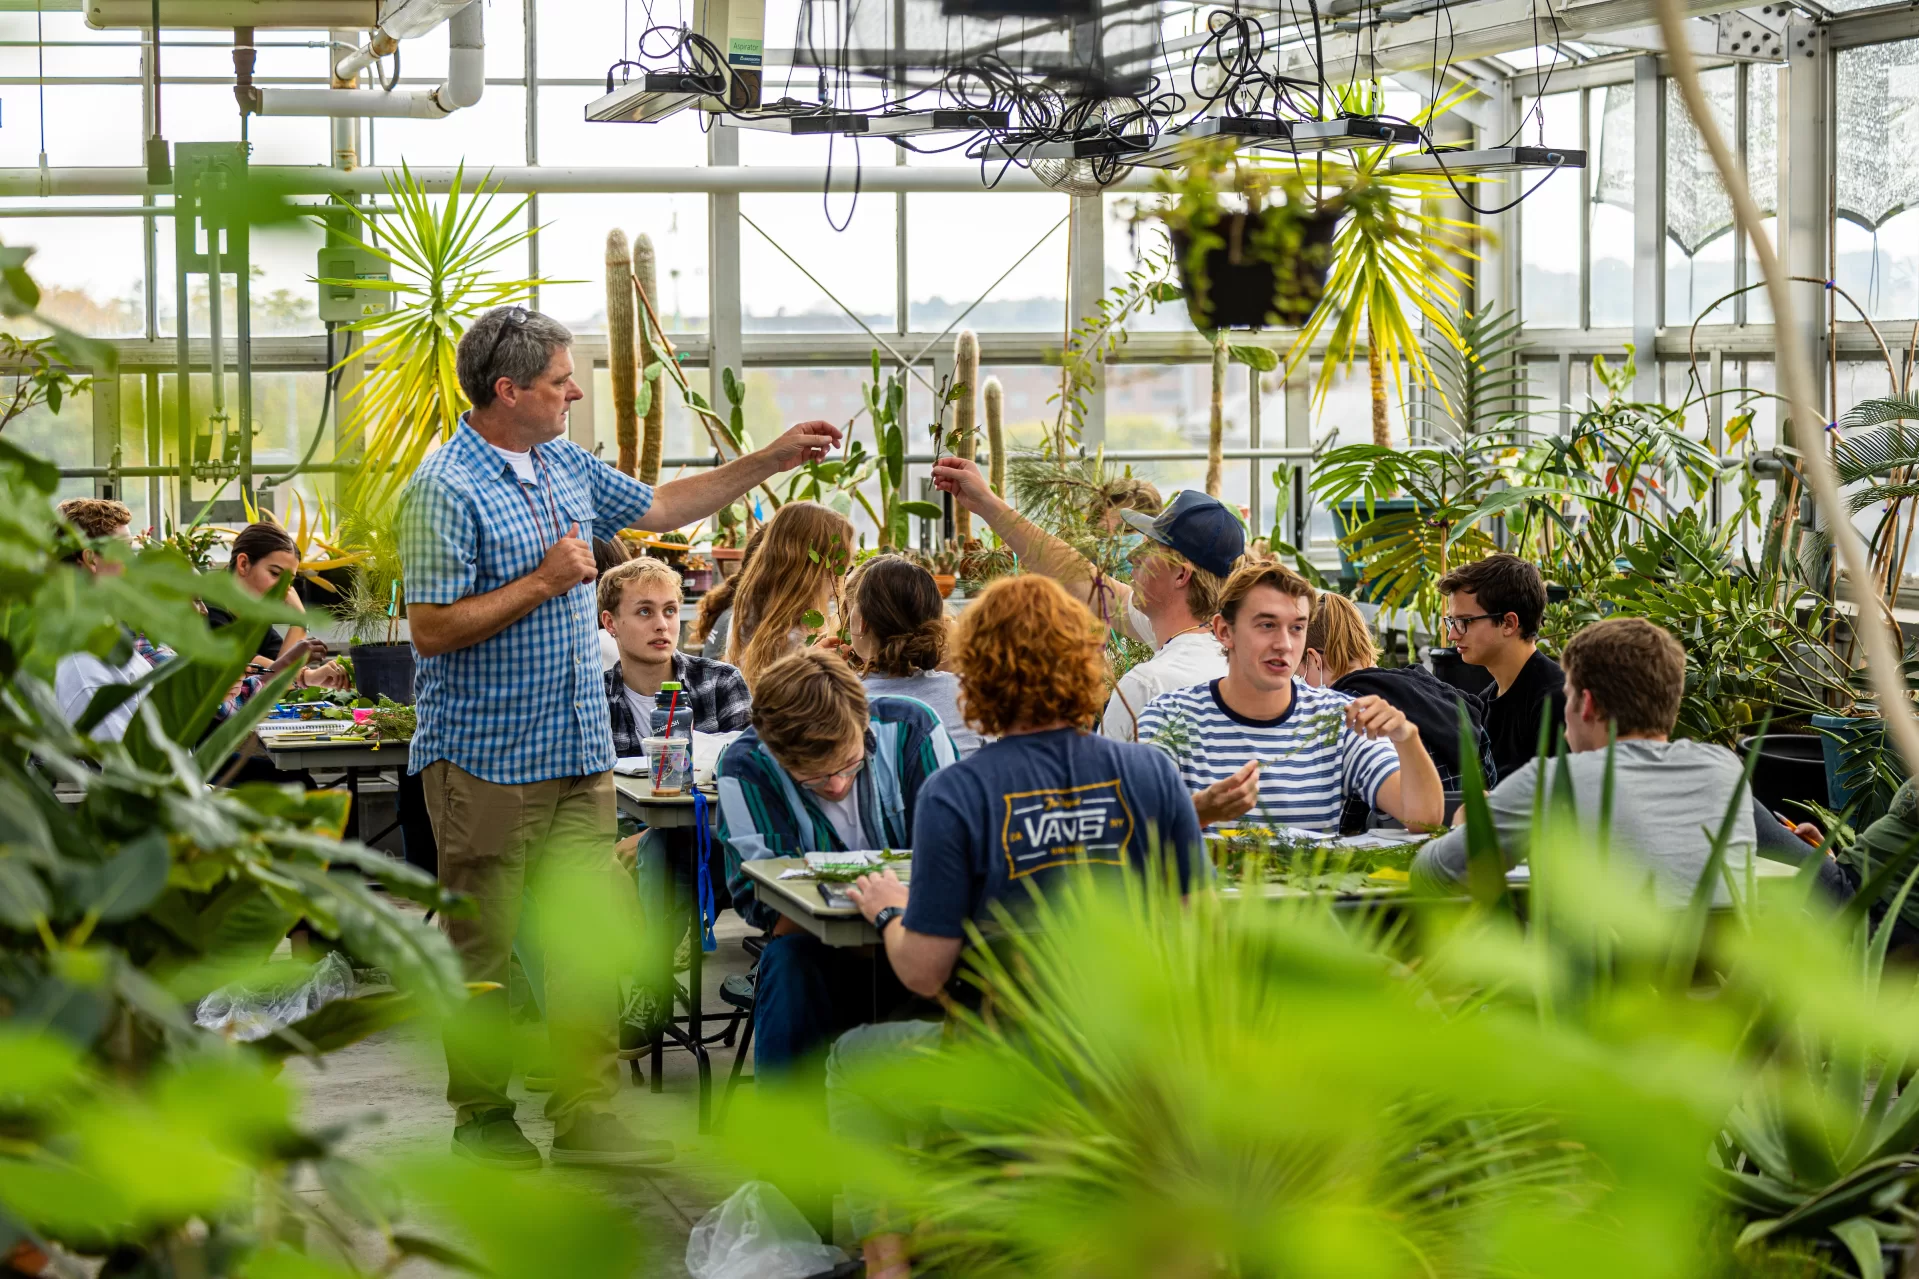 “Usually at this hour, we’d be down in the lecture hall.”

—Associate Professor of Biology Brett Huggett explaining why he took his dendrology students to the Carnegie Greenhouse rather than have them remain in the classroom to identify tree species.

Huggett teaches BIO 271/Dendrology and the Natural History of Tree, a field-based course in which students engage in the scientific study of the natural history and identification of trees and important shrubs native to New England, and some commonly planted non-native trees. Topics include the anatomy, function, taxonomy, biology, and uses of trees. Lecture topics support weekly outdoor laboratories, which may include trips to such field sites as the Saco Heath, Thorncrag Bird Sanctuary, and Wolfe's Neck State Park. Study of the woody flora of New England serves as a foundation for further work in biology, environmental studies, conservation, or related fields.

(Phyllis Graber Jensen/Bates College)

#batescollege #biology #stem #tress #dendrology #liberalarts #faculty #lab